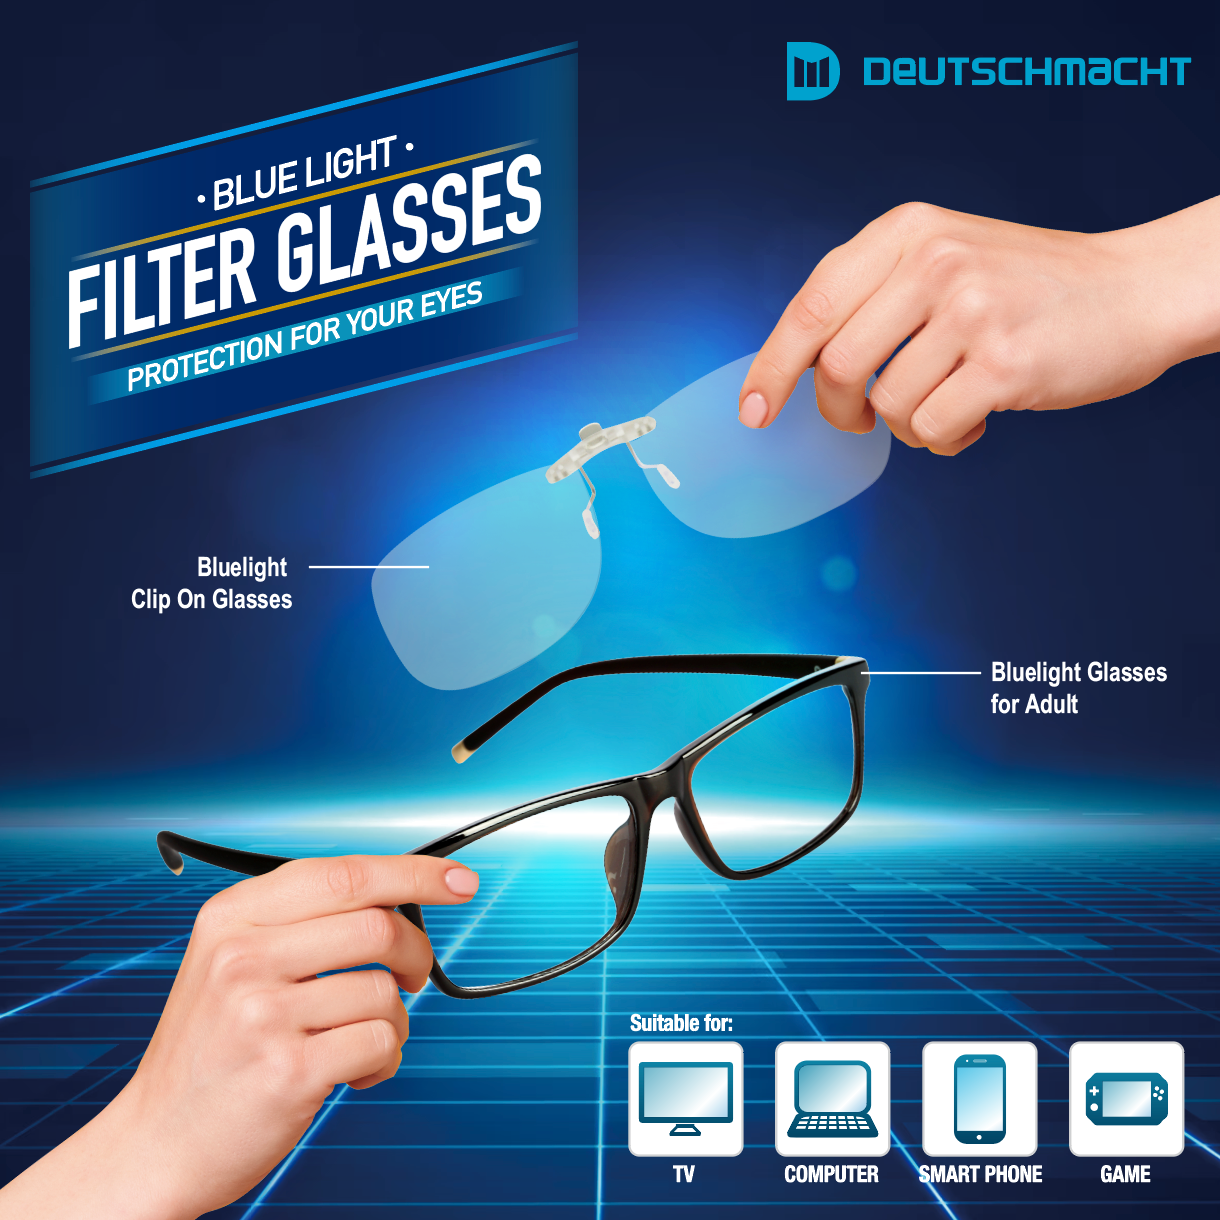 Bluelight Glasses for Adult (Square)